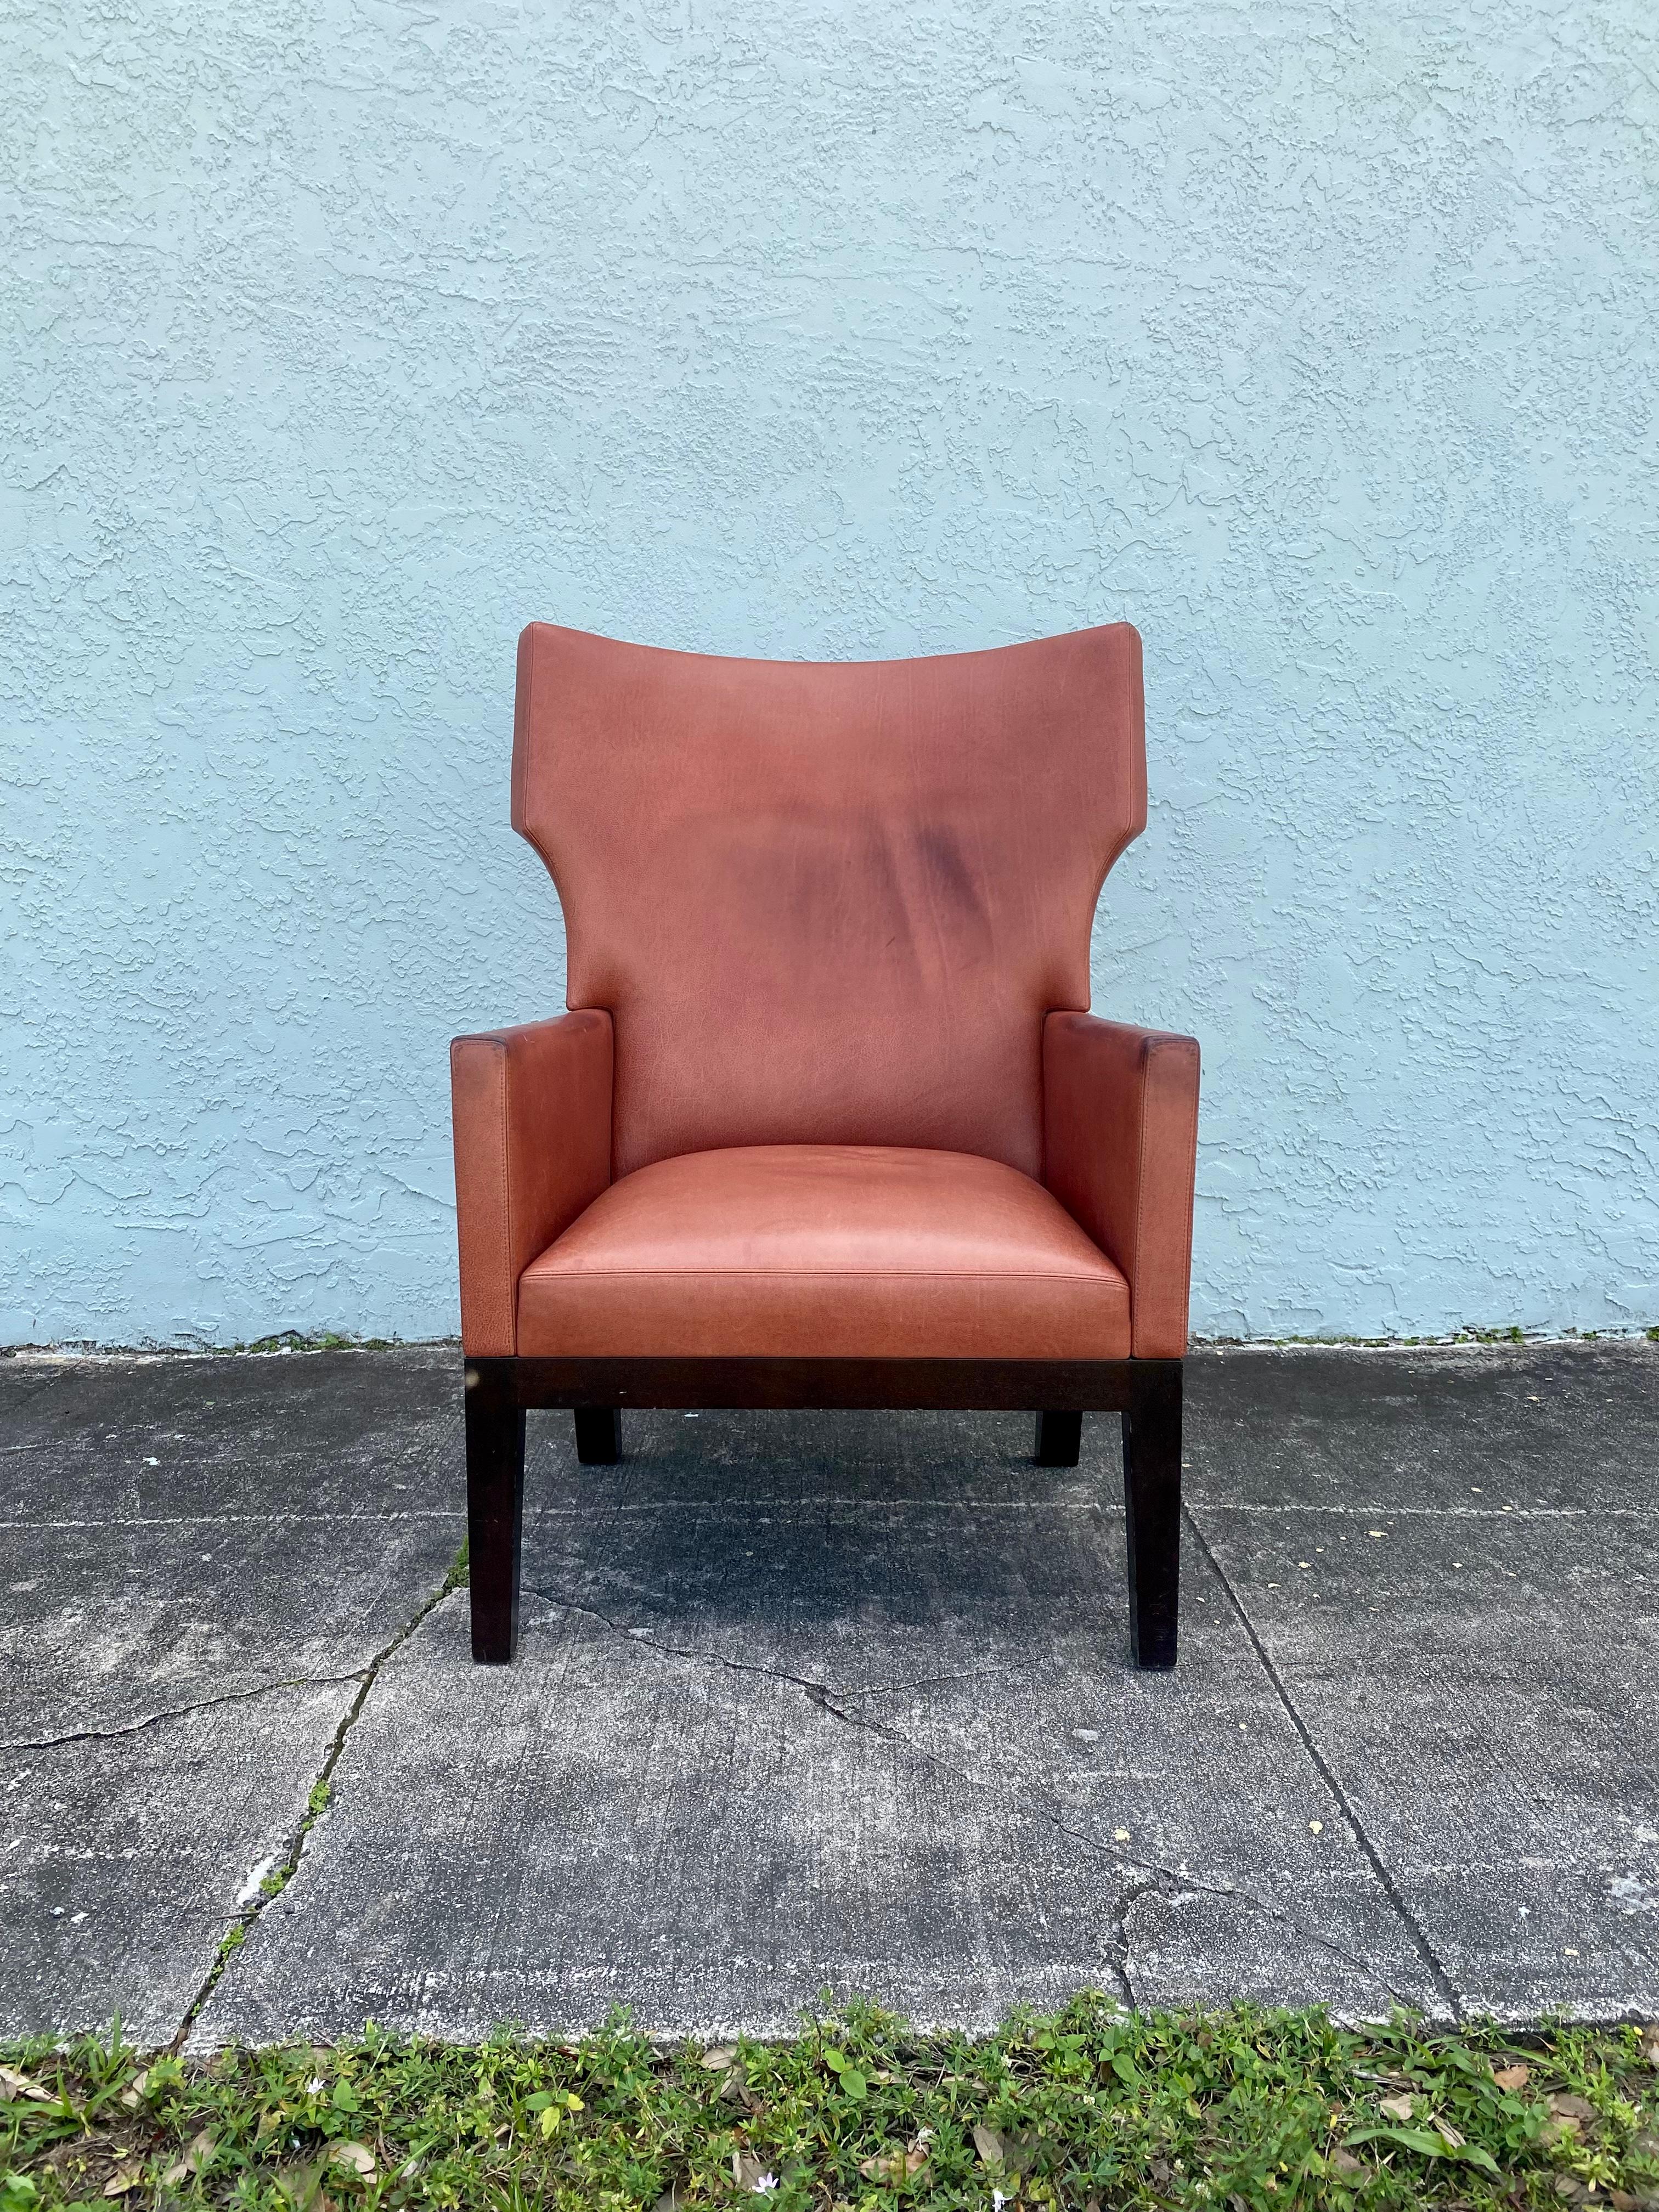 On offer on this occasion is one of the most stunning and rare chair you could hope to find. Outstanding design is exhibited throughout. The chair is statement piece and packed with personality!  Just look at the gorgeous details on this beauty! The